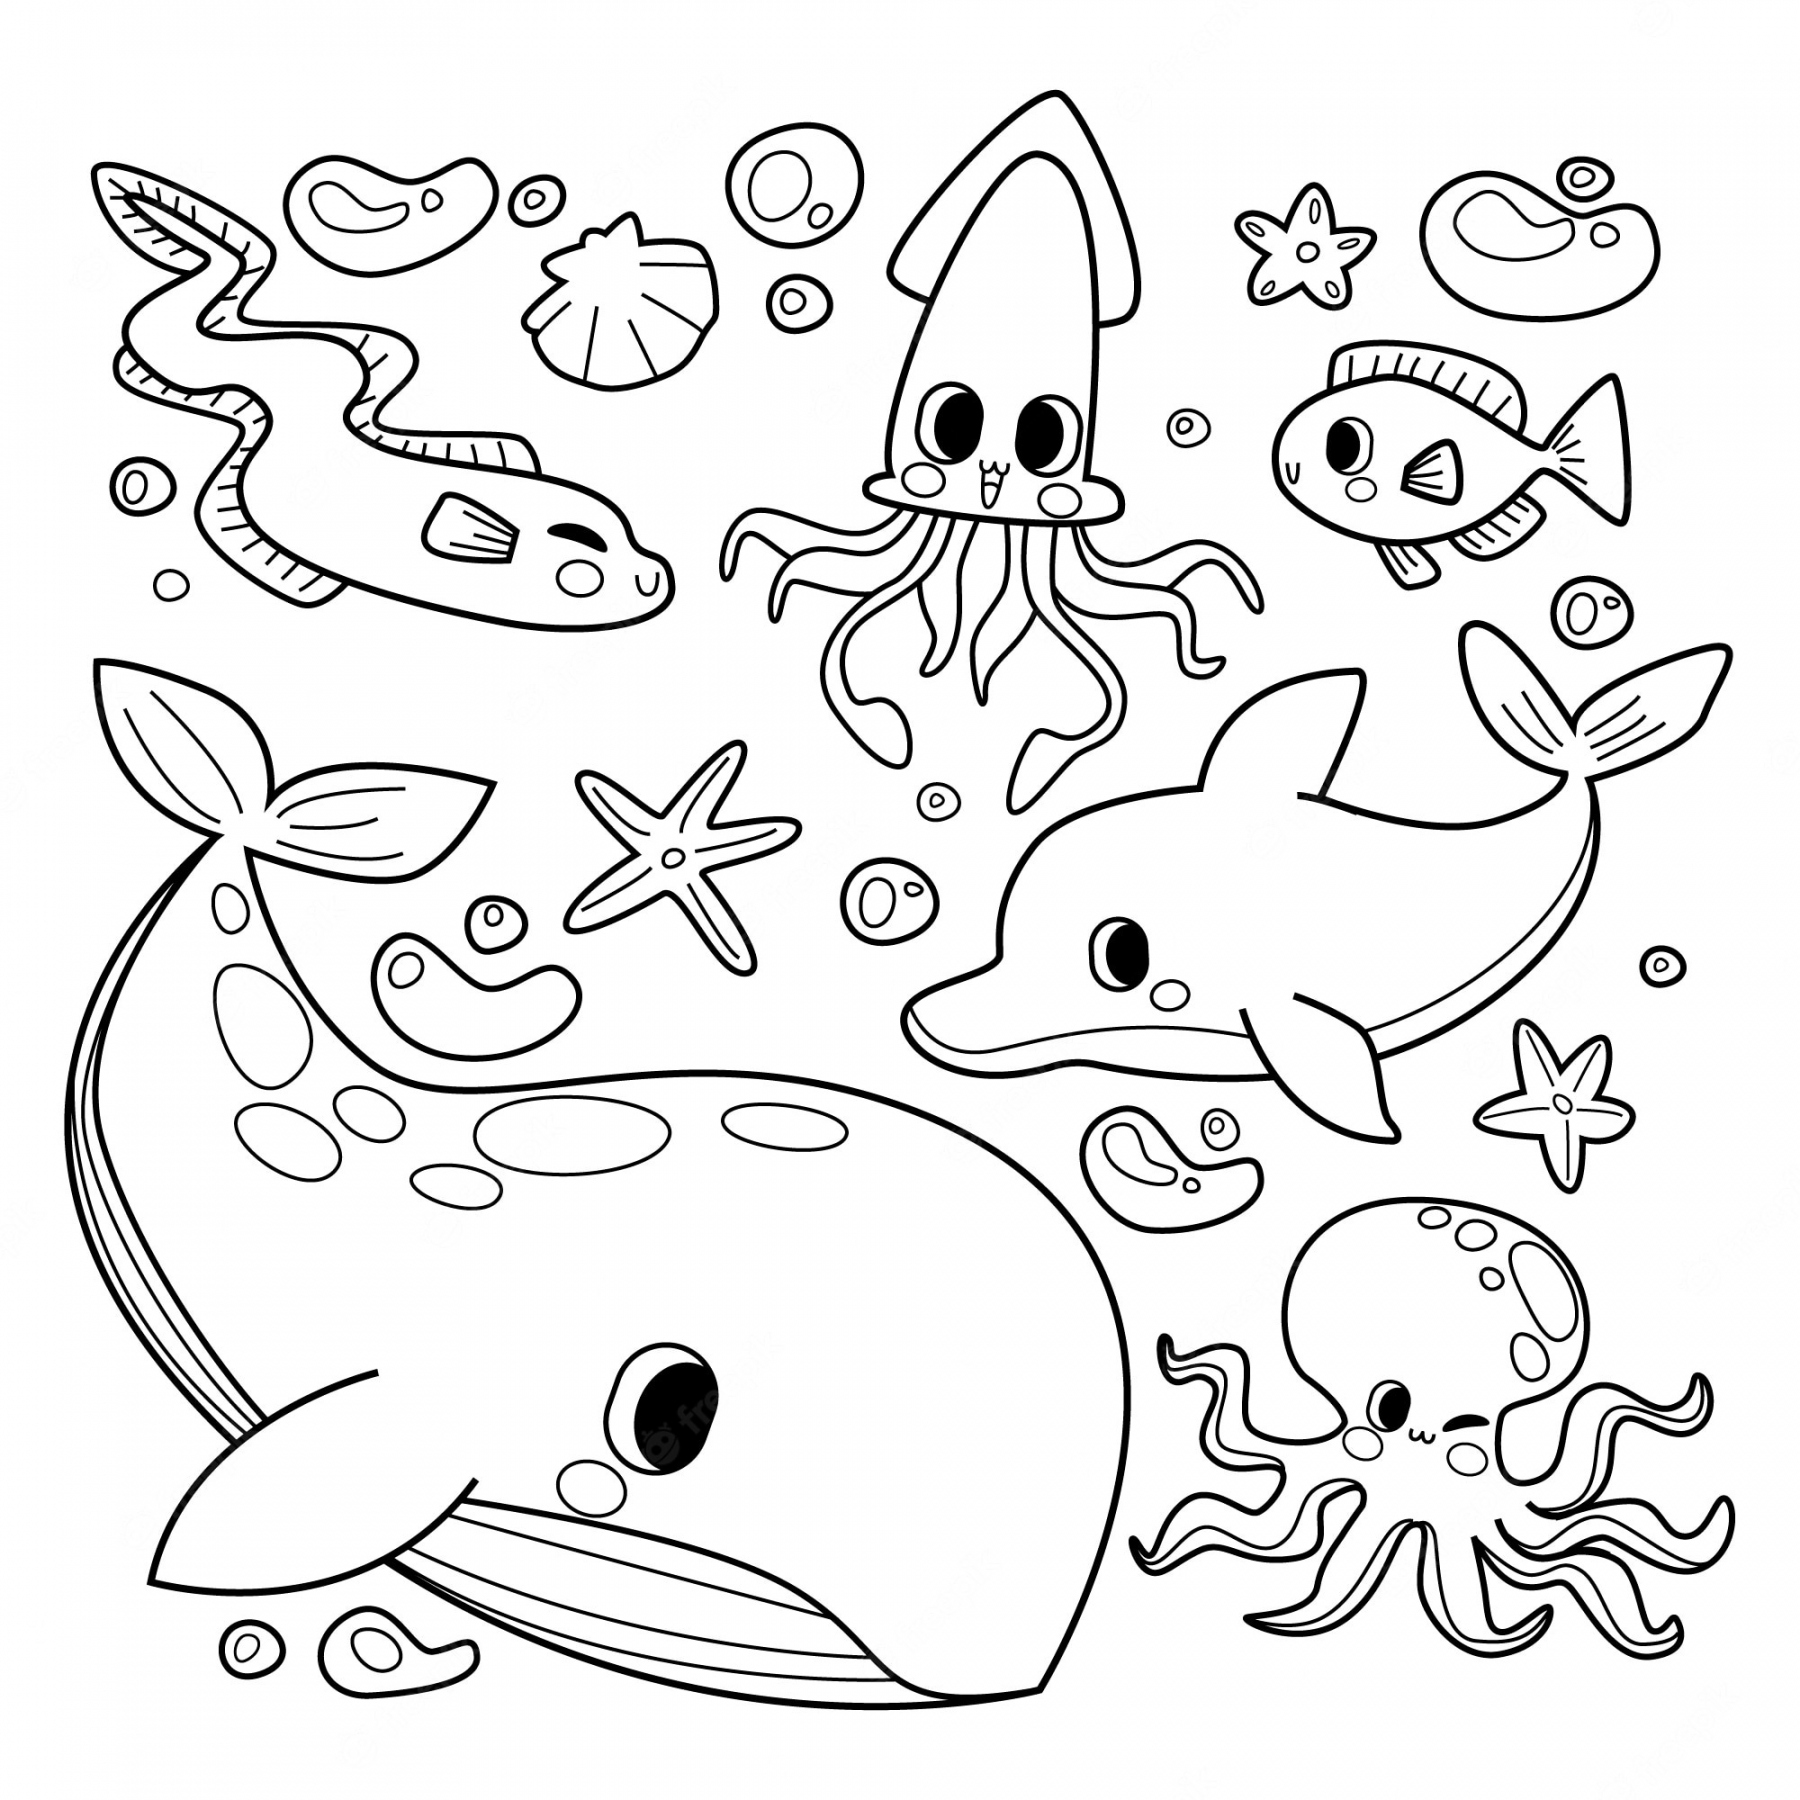 Coloring Pages Images - Free Download on Freepik